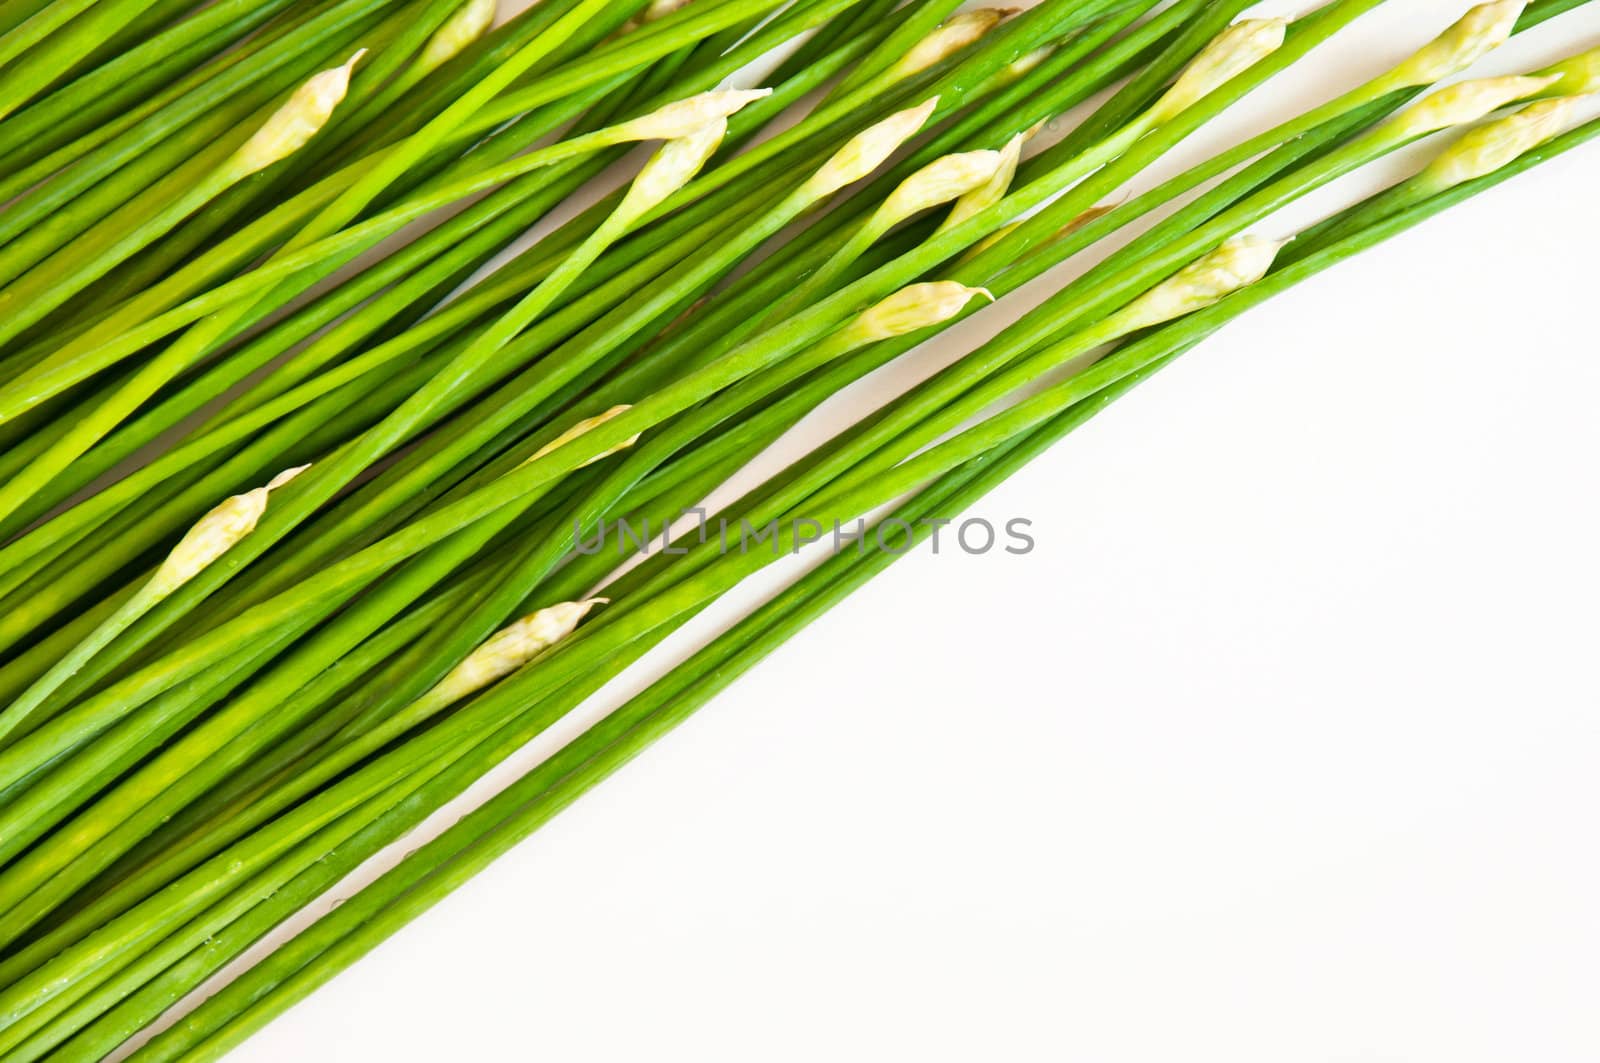 Chinese chive tilted on white background by sayhmog